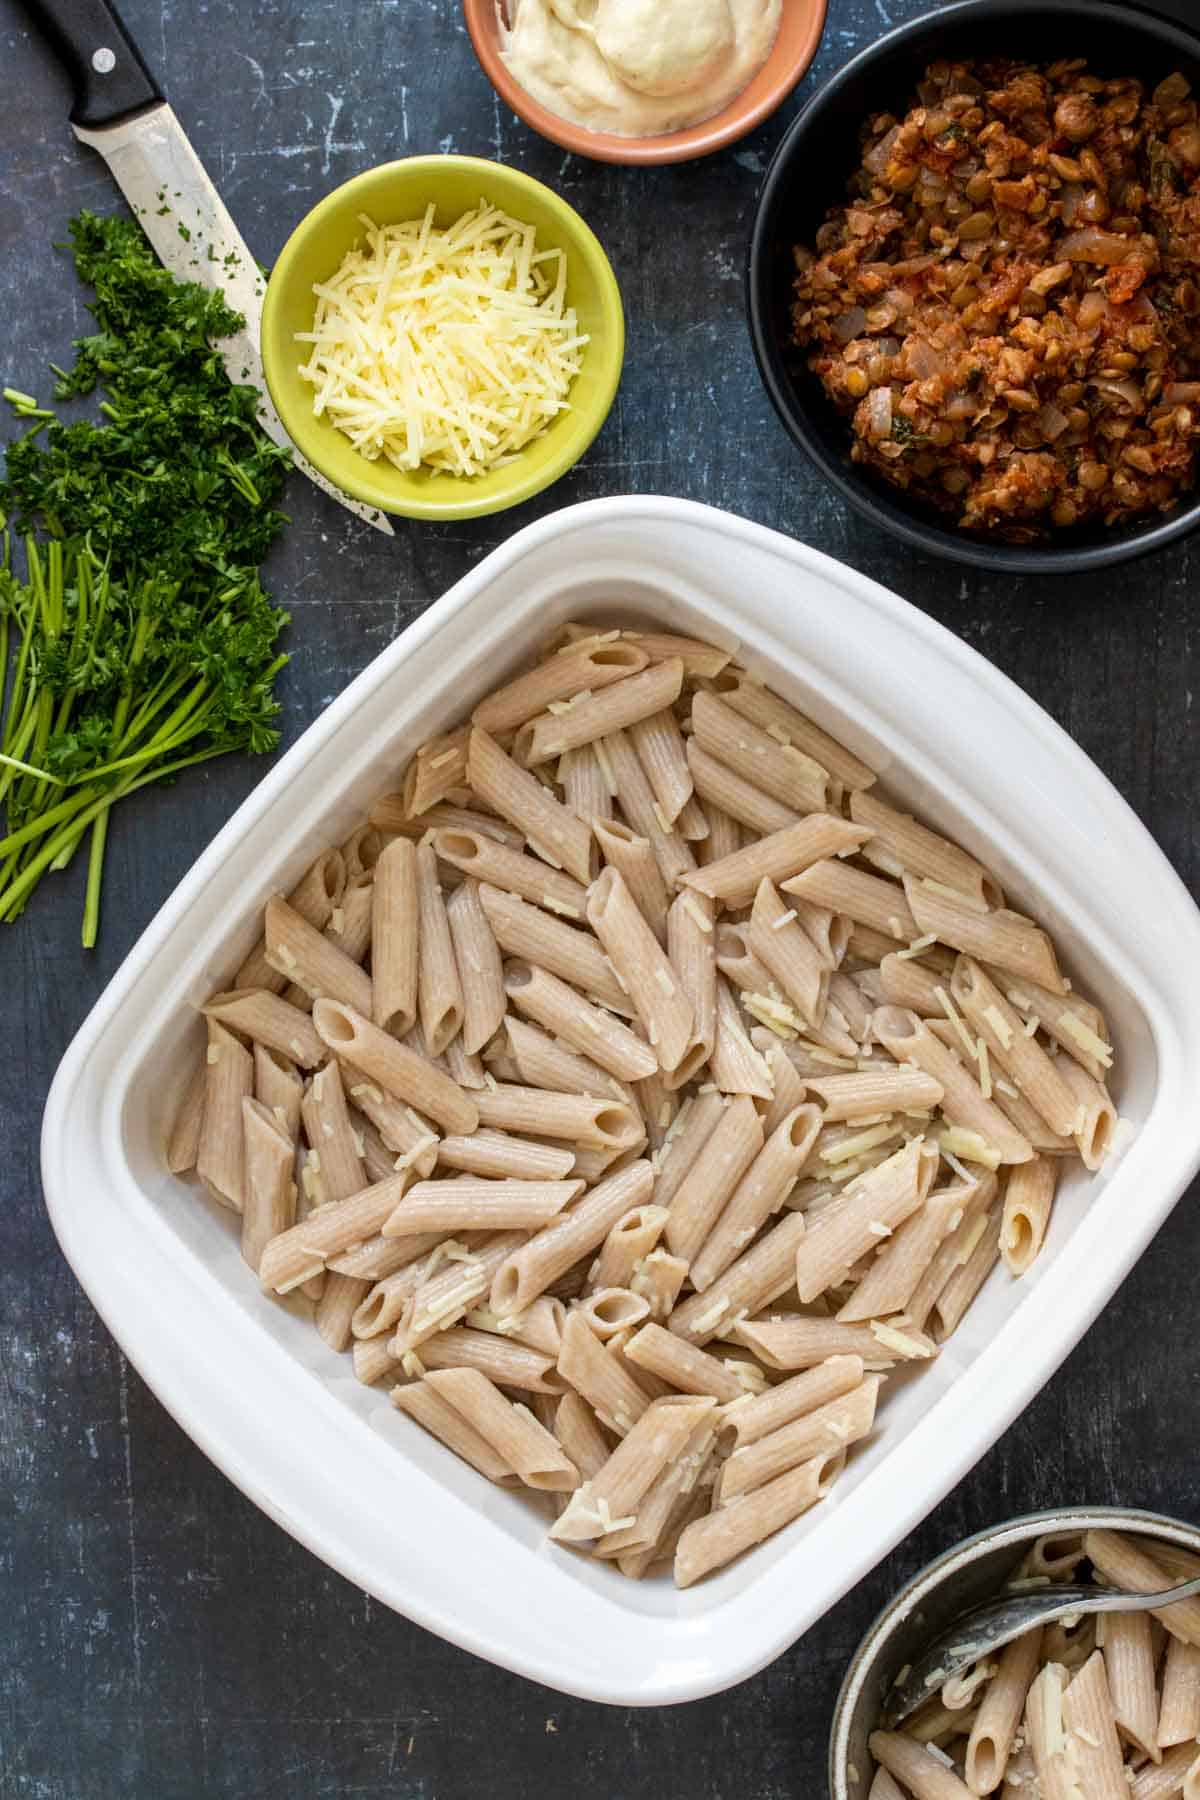 Top view of a white baking dish filled with penne pasta next to other ingredients needed to make Pastitsio